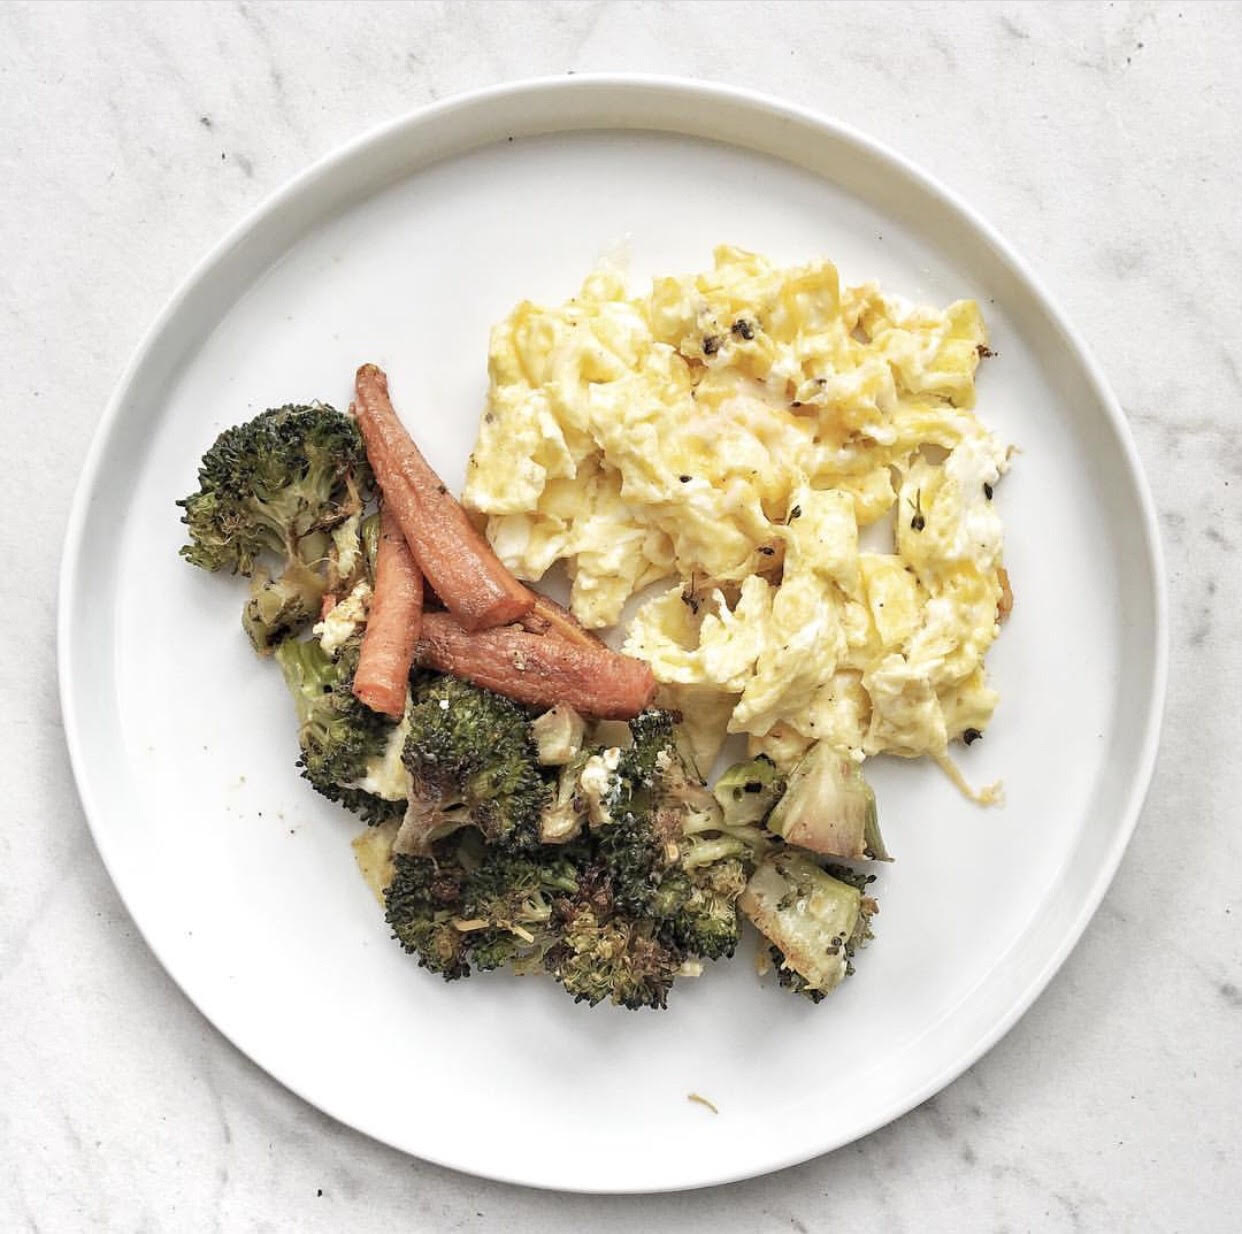 cooked broccoli and carrots with scrambled eggs